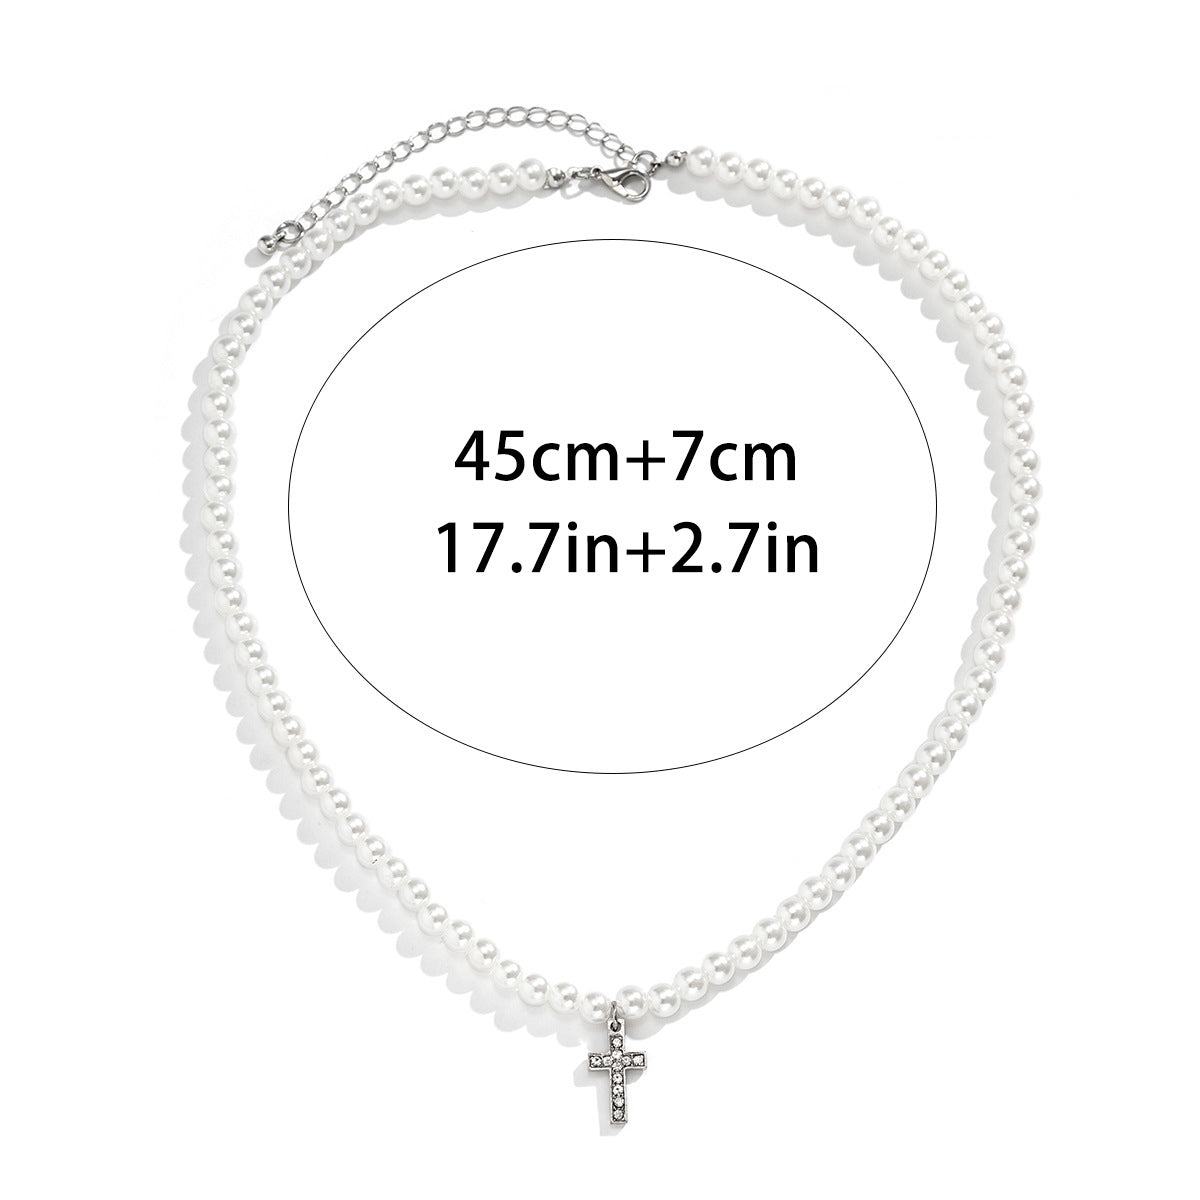 Fashionable simple hip-hop style diamond cross with pearl pendant necklace